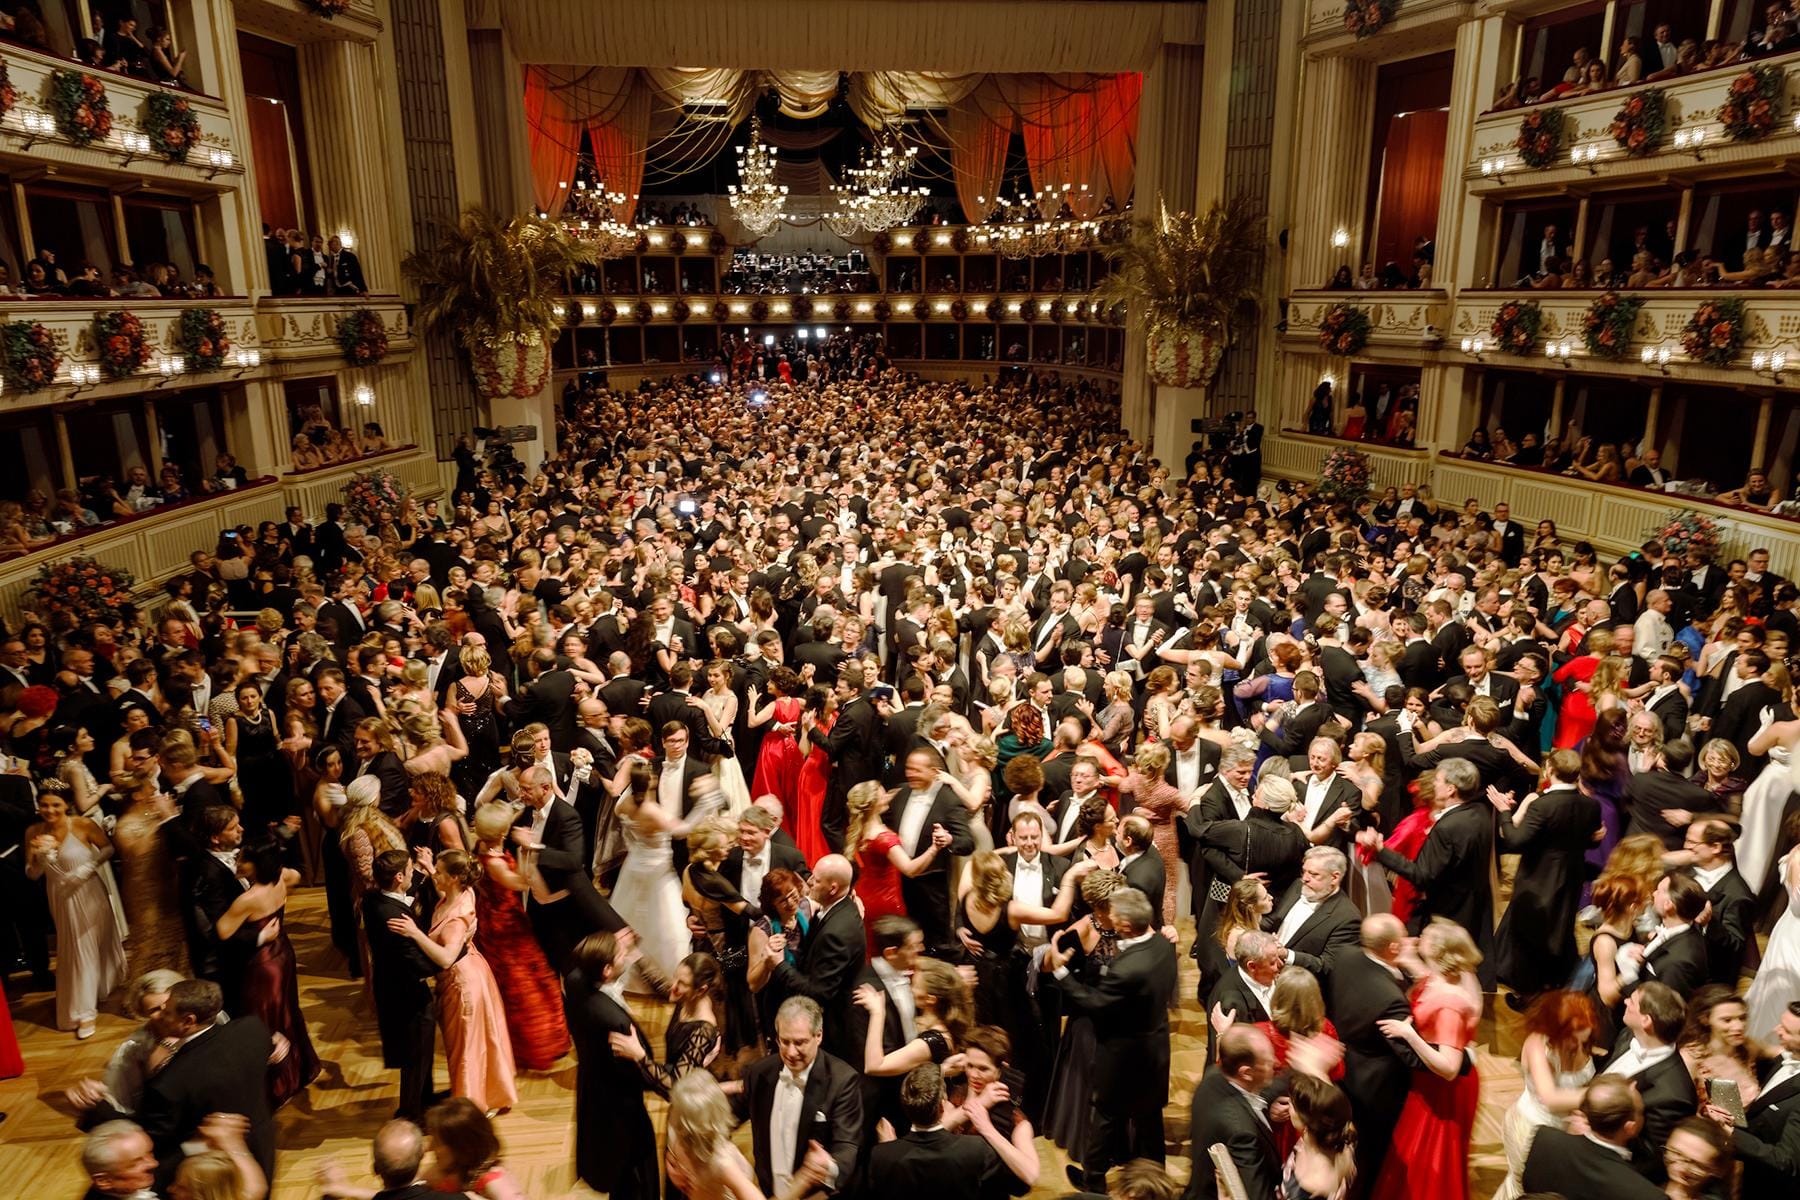 09_9ThingsyouneedtoknowaboutAustriaBall__TheEnd_dreamstime_l_109619823